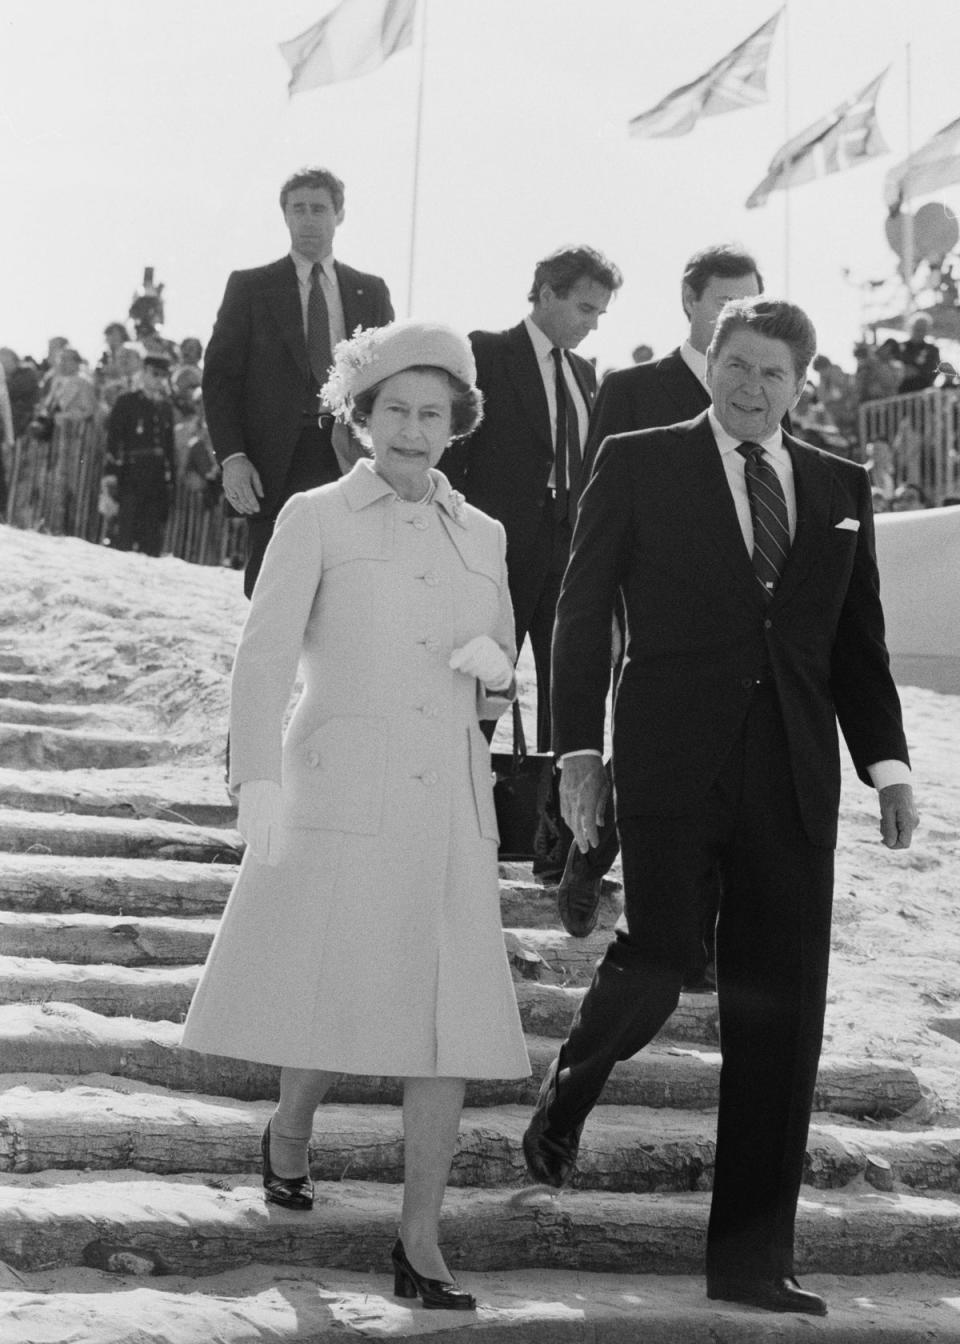 Queen Elizabeth and Ronald Reagan commemorating the 40th anniversary of D-Day, Normandy, 1984 (Getty)